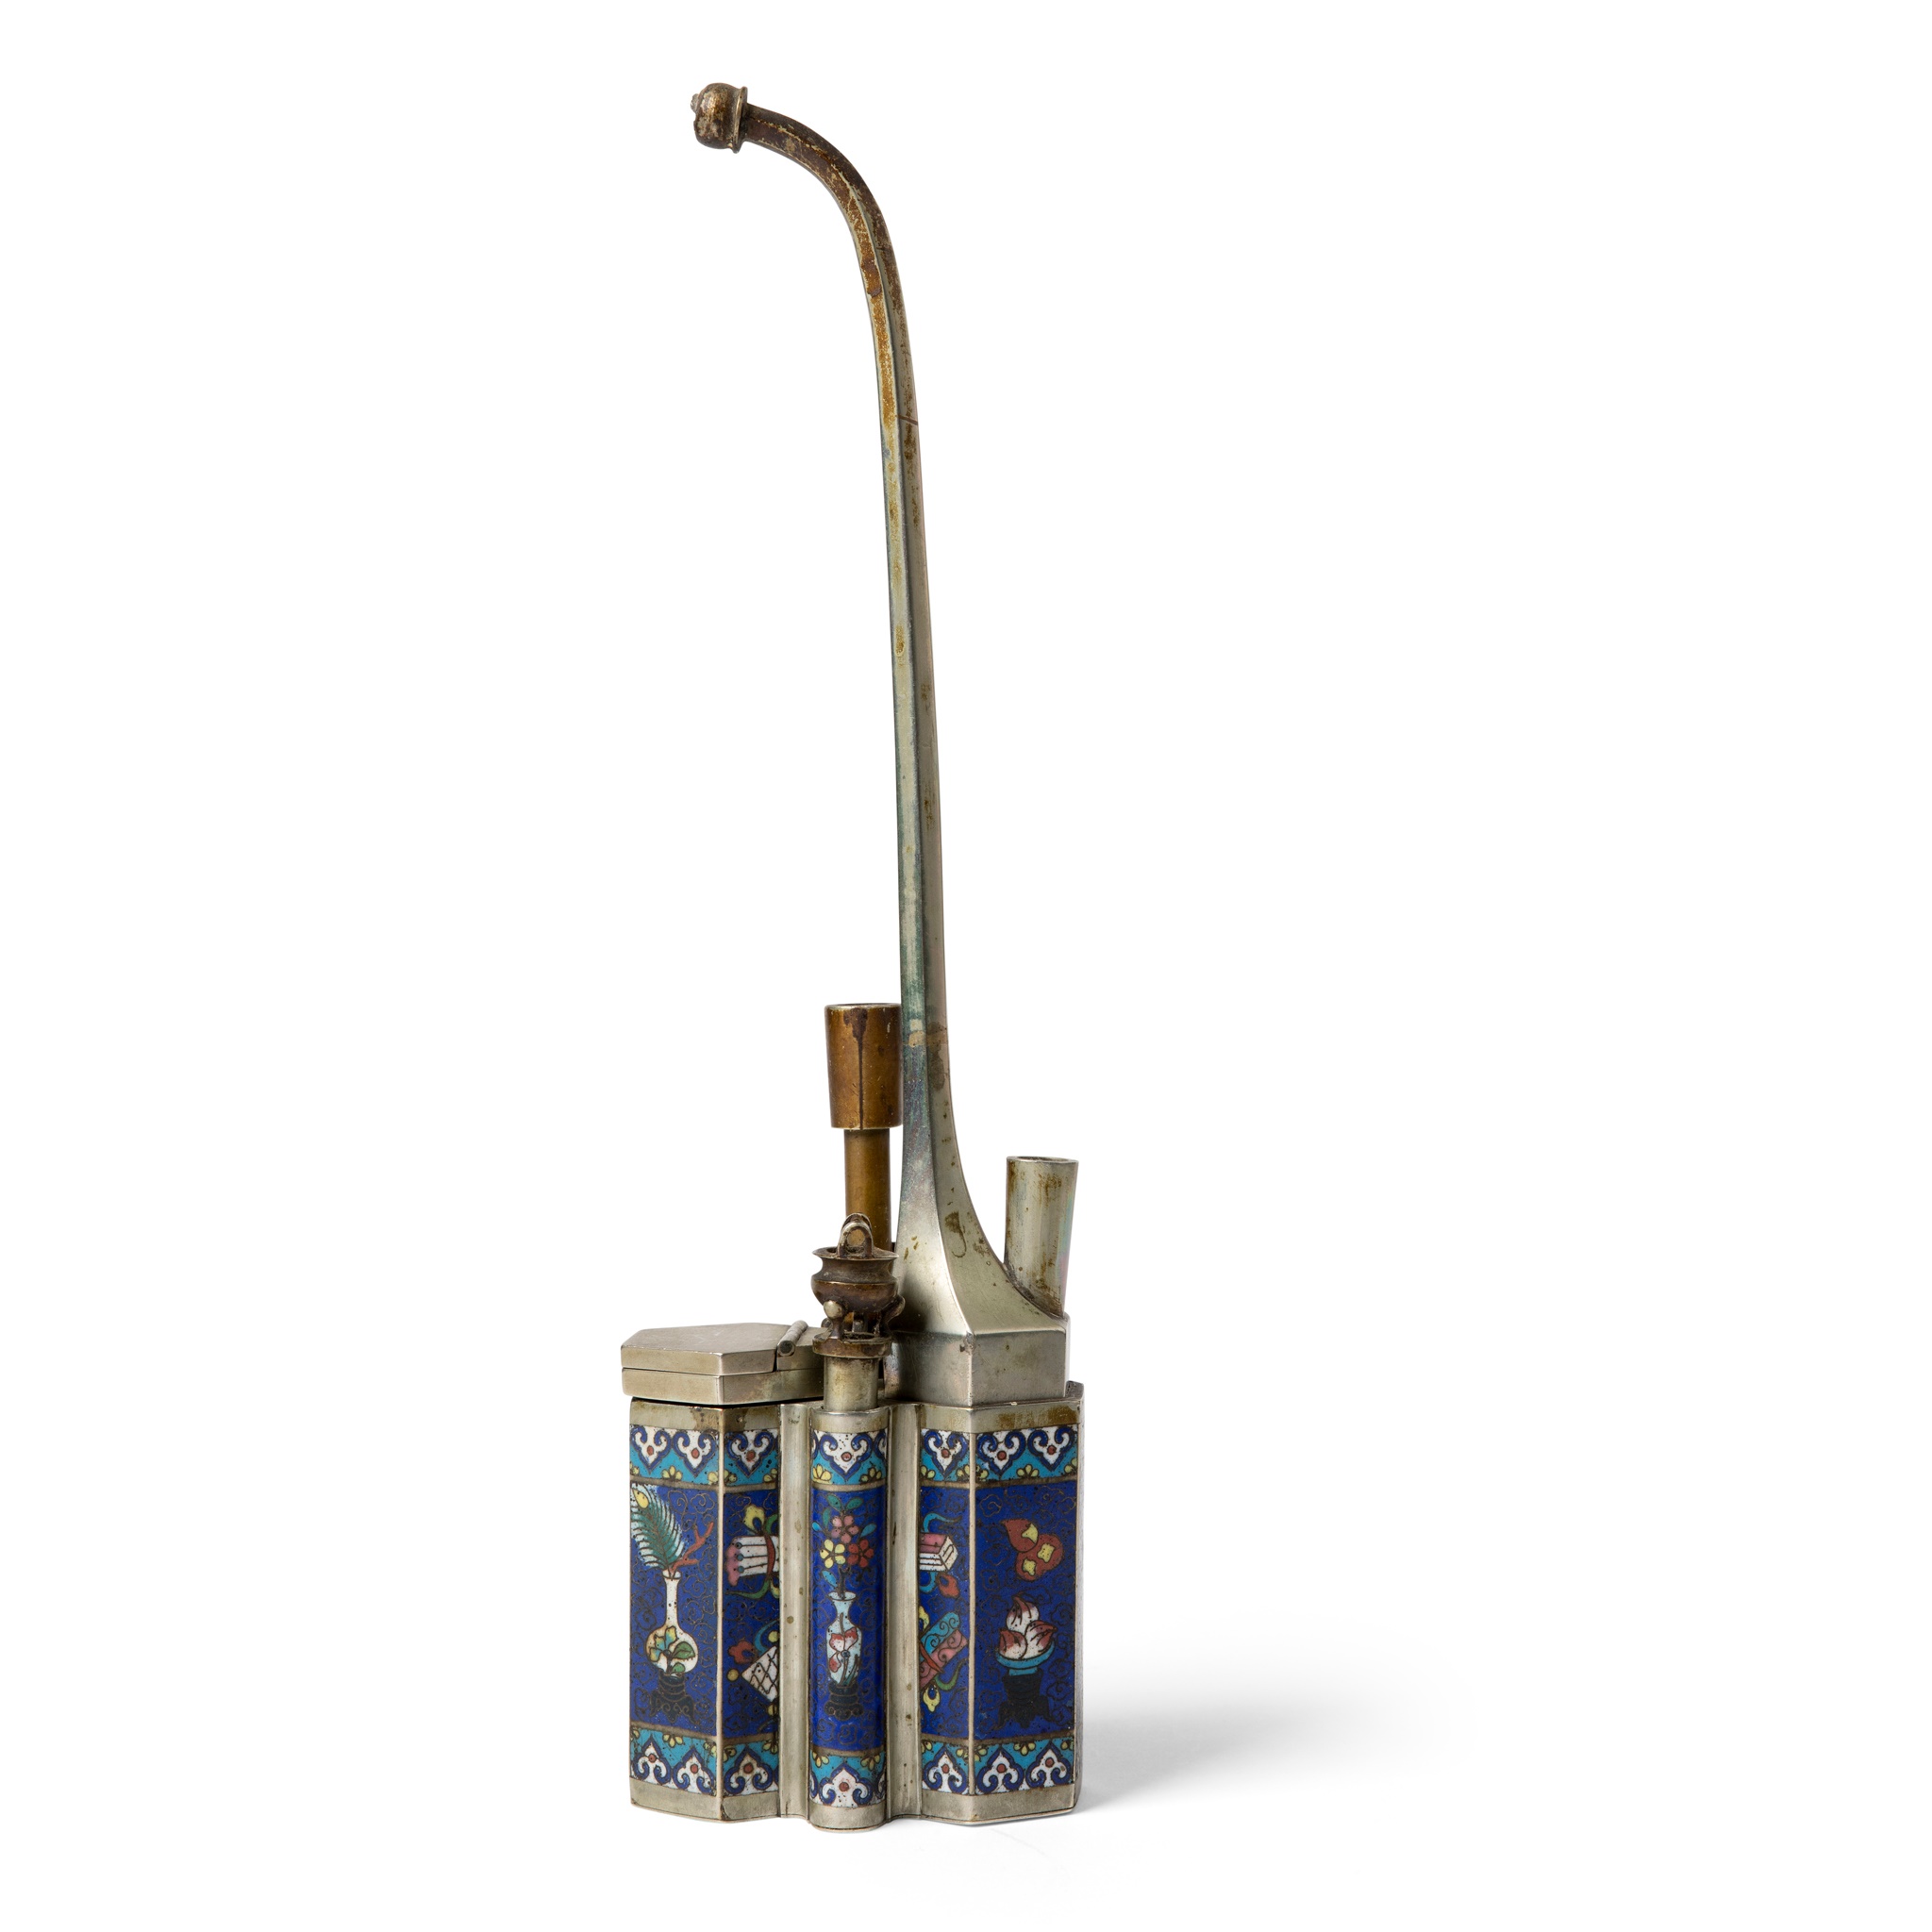 PAKTONG CLOISONNÉ ENAMEL WATER PIPE LATE QING DYNASTY-REPUBLIC PERIOD, 19TH-20TH CENTURY